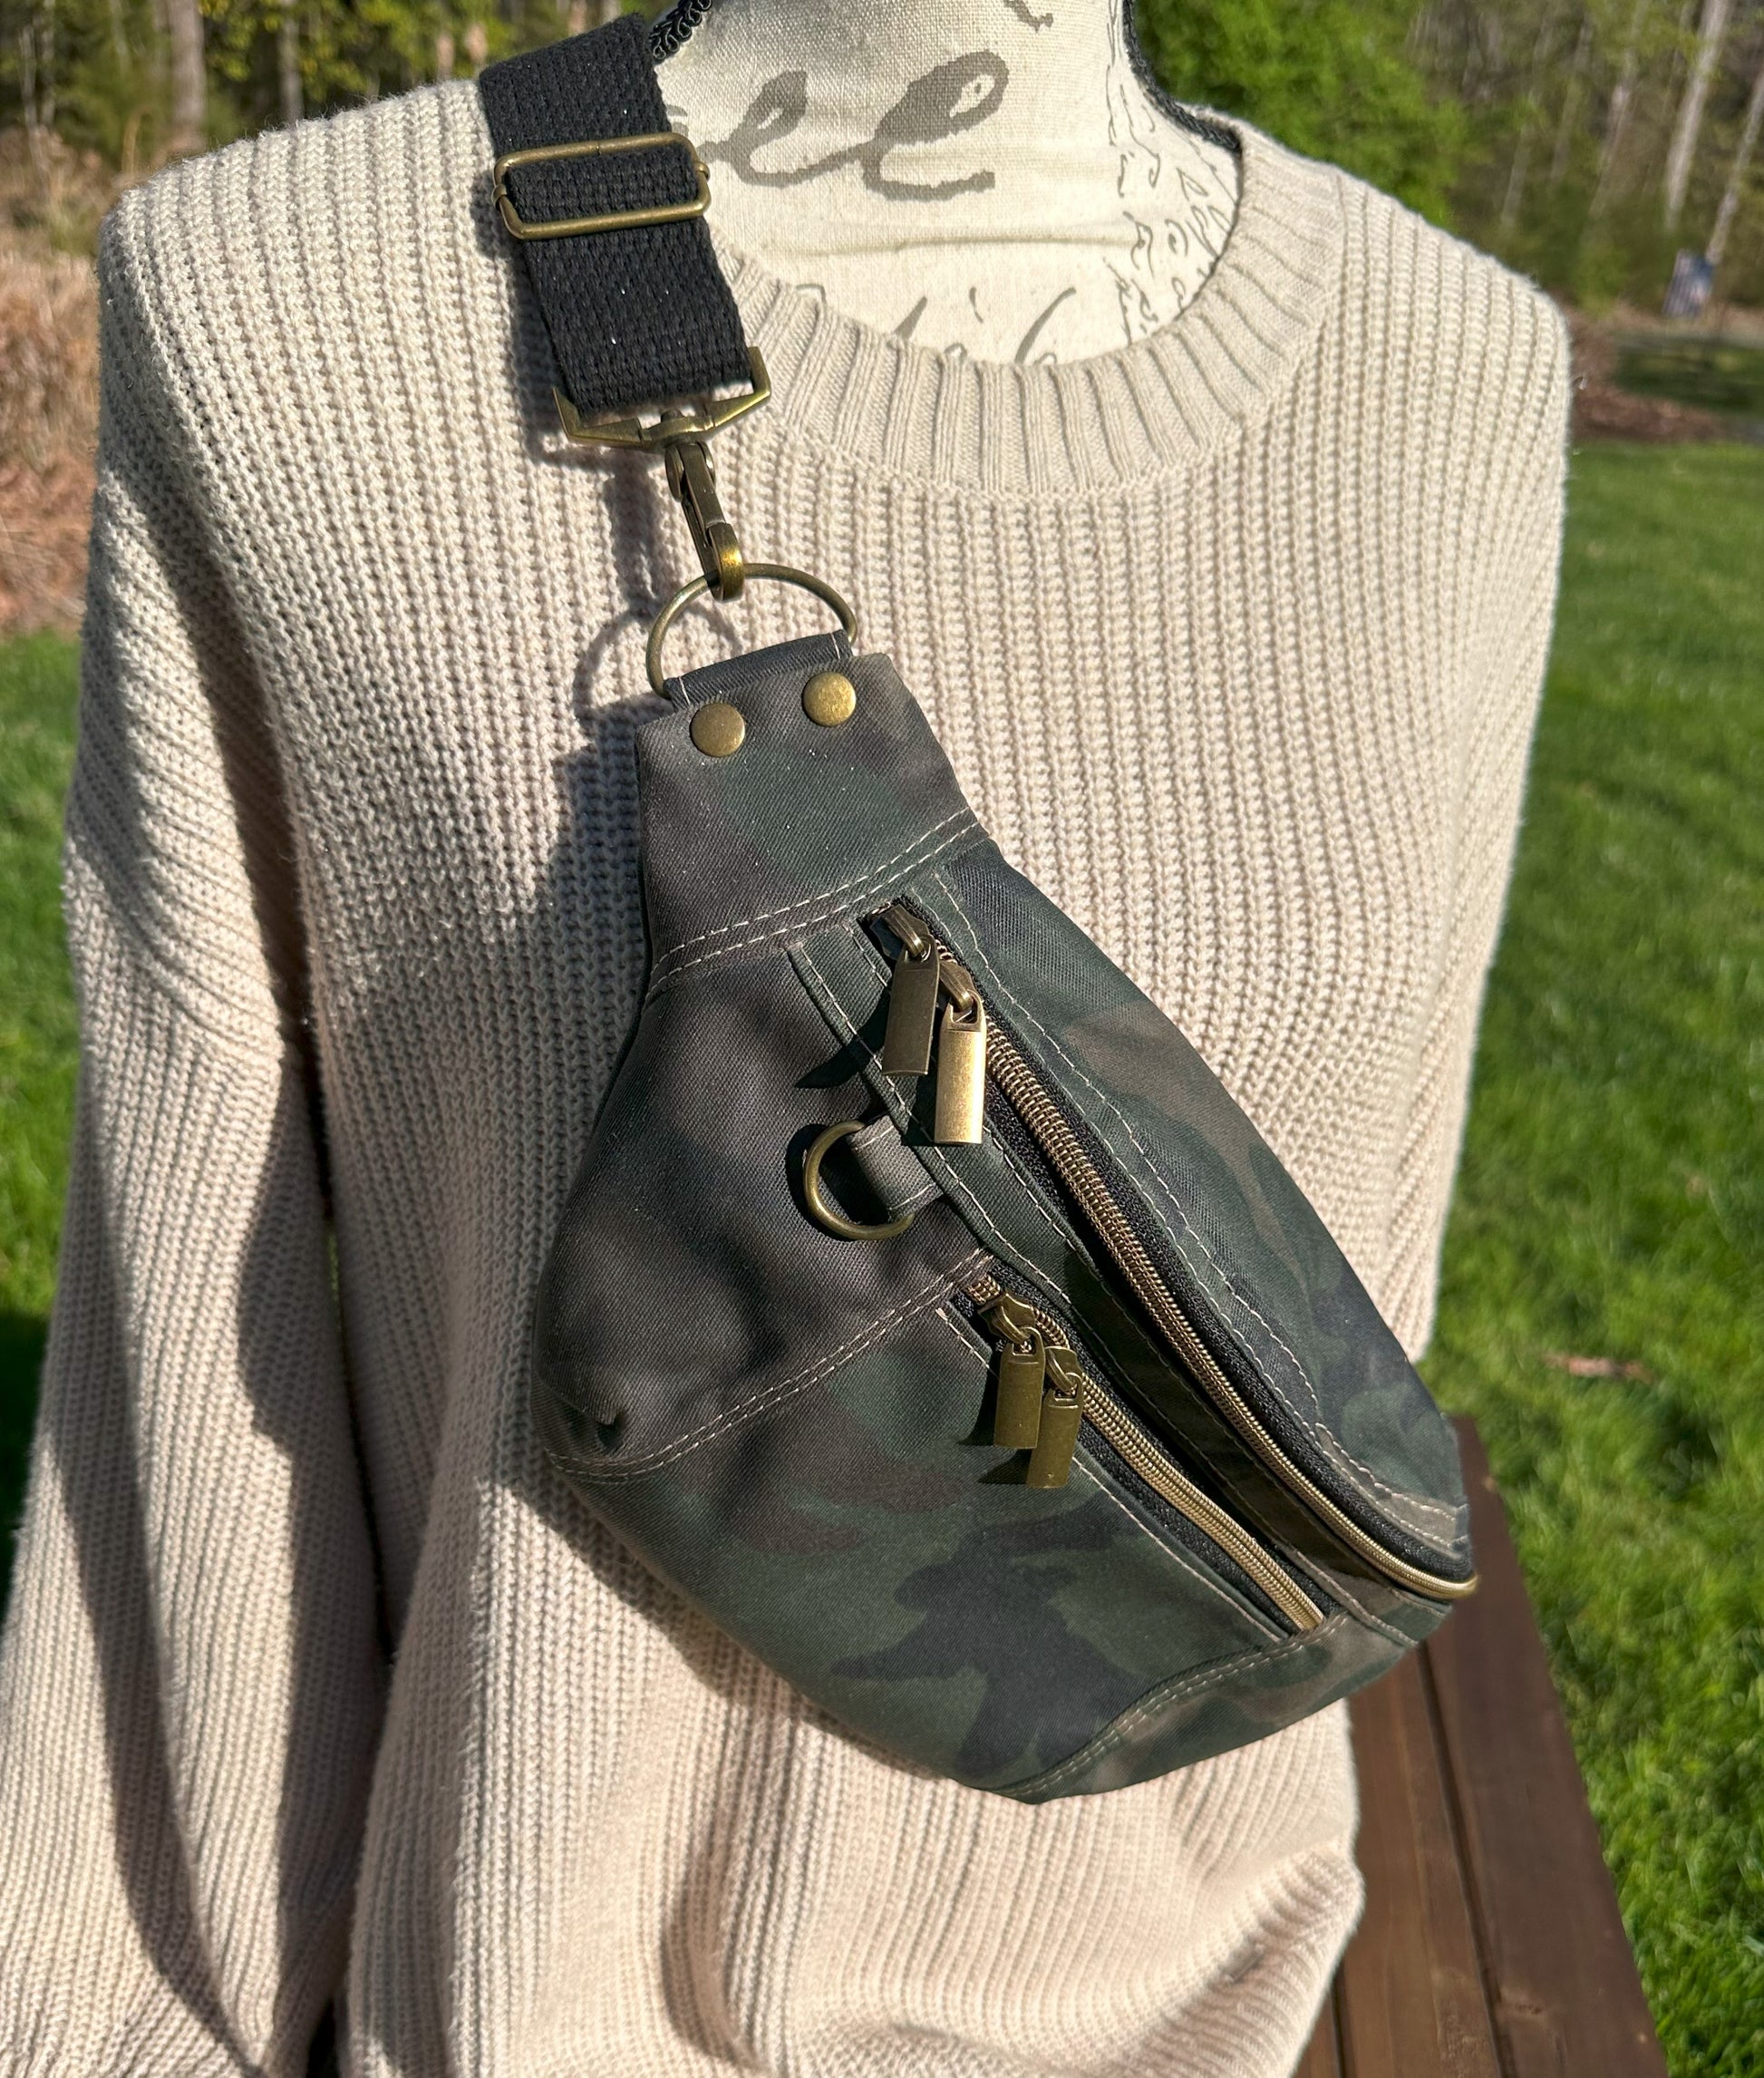 Camo Waxed Twill Antique Brass Hardware Jib Hip Bag Sling squirescanvascreations.com